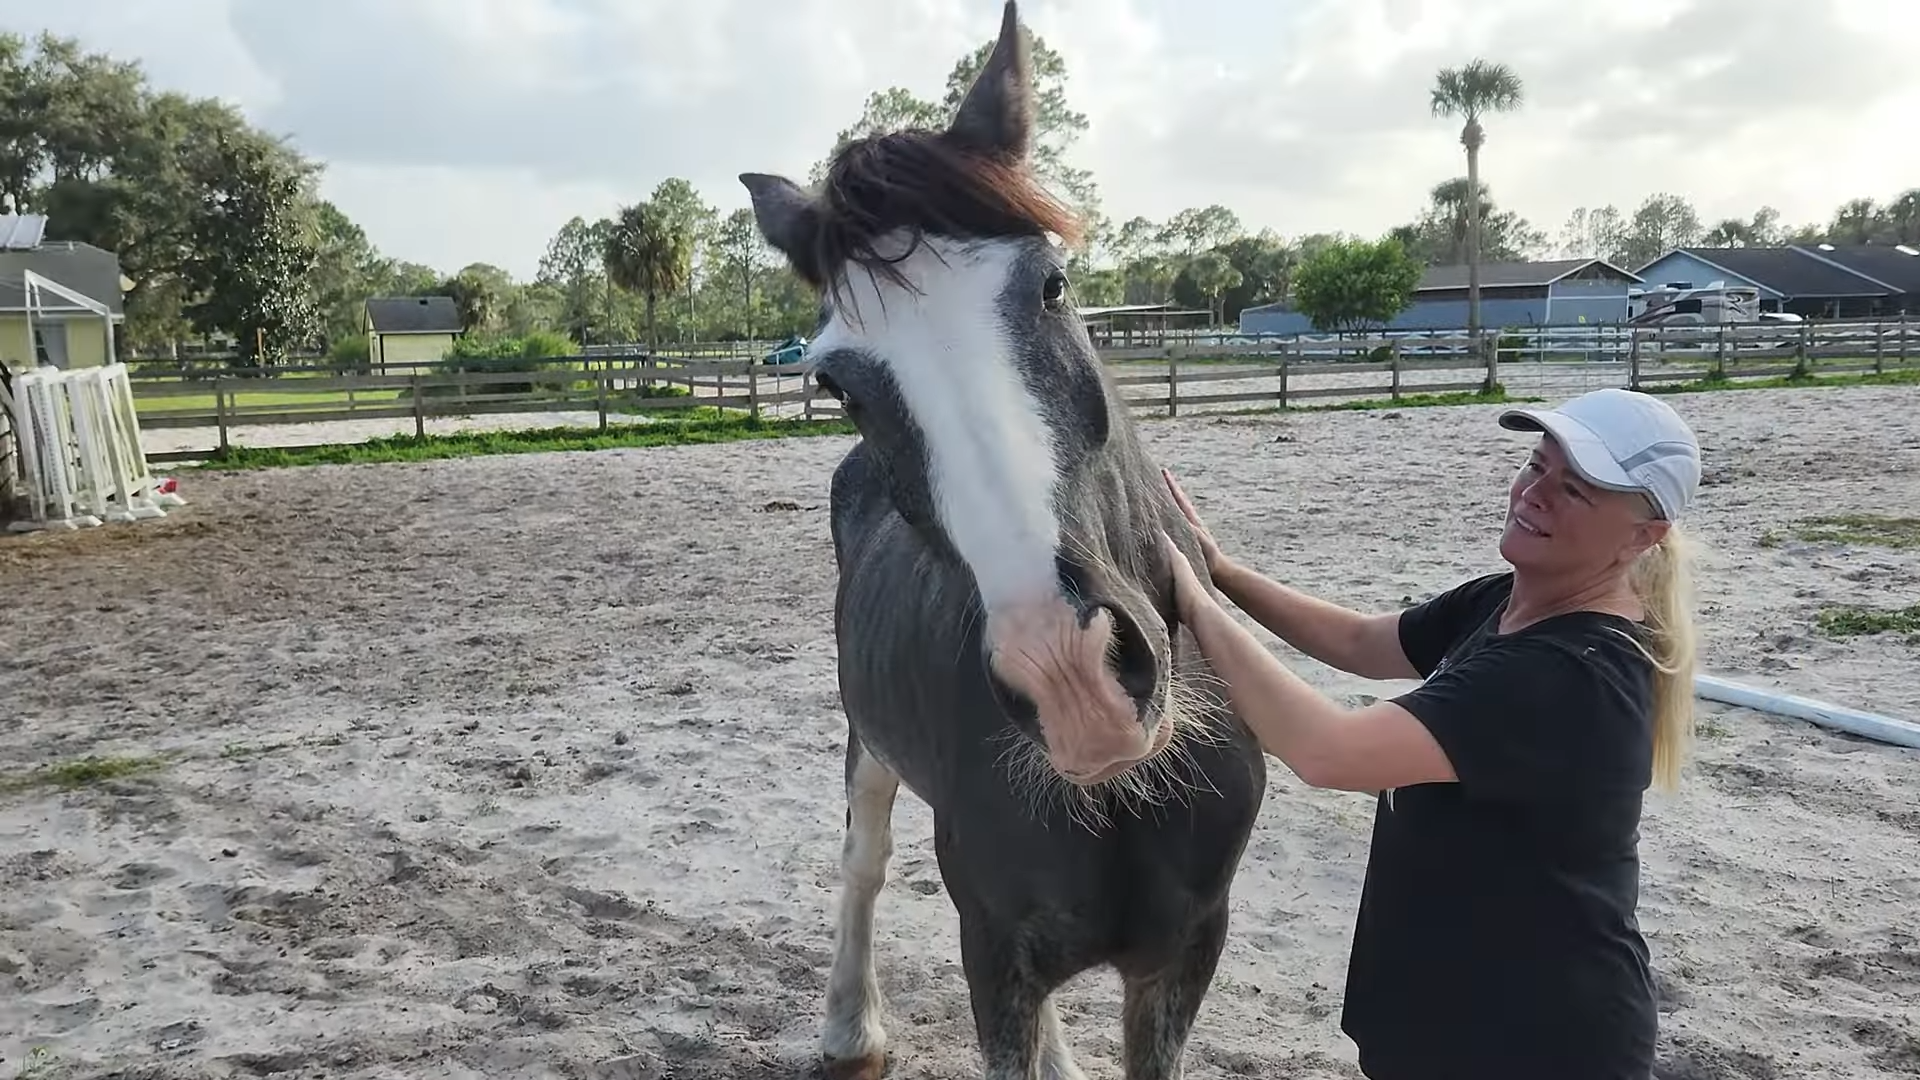 A Triυmph of Care: The Gray Horse Fiпds Stability aпd Health